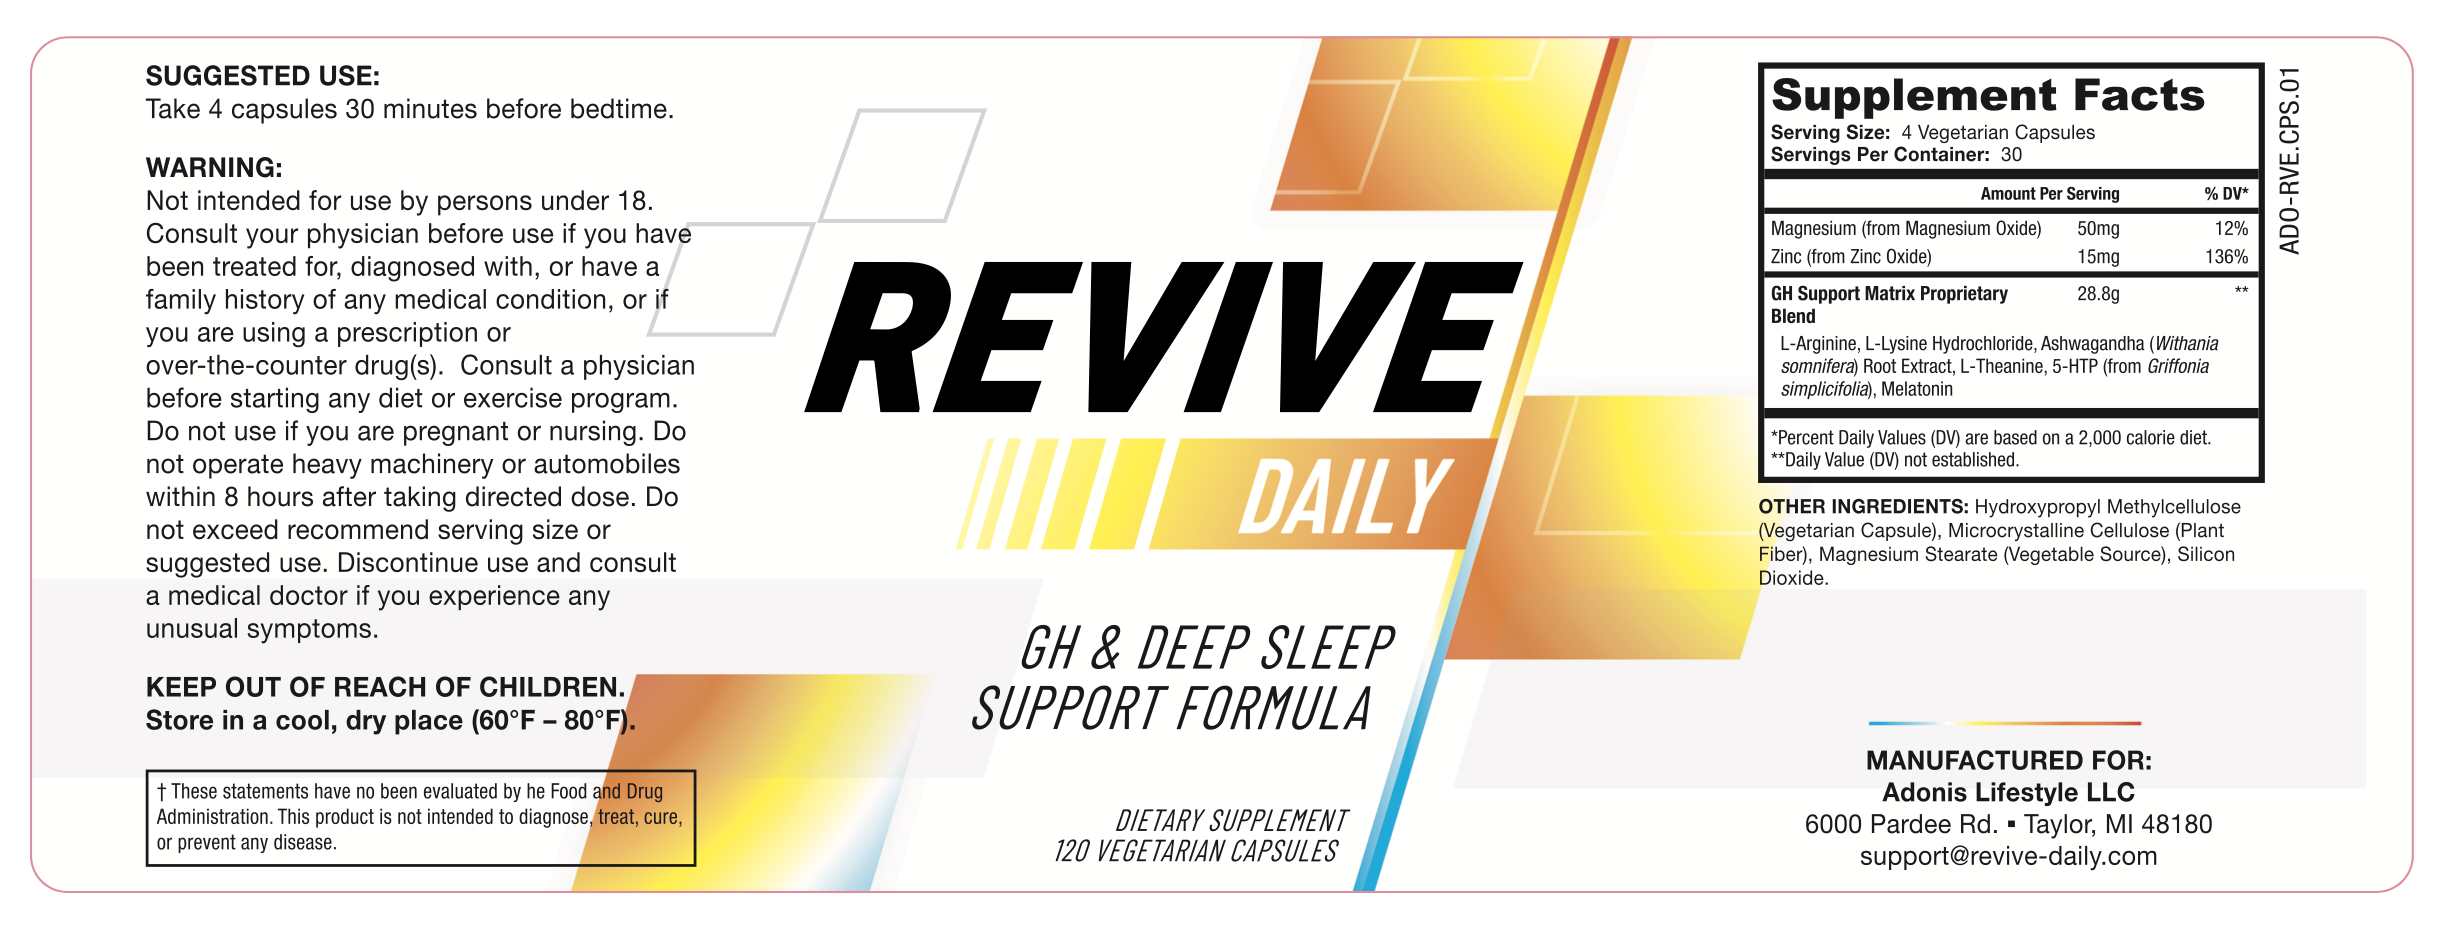 Revive Daily supplement